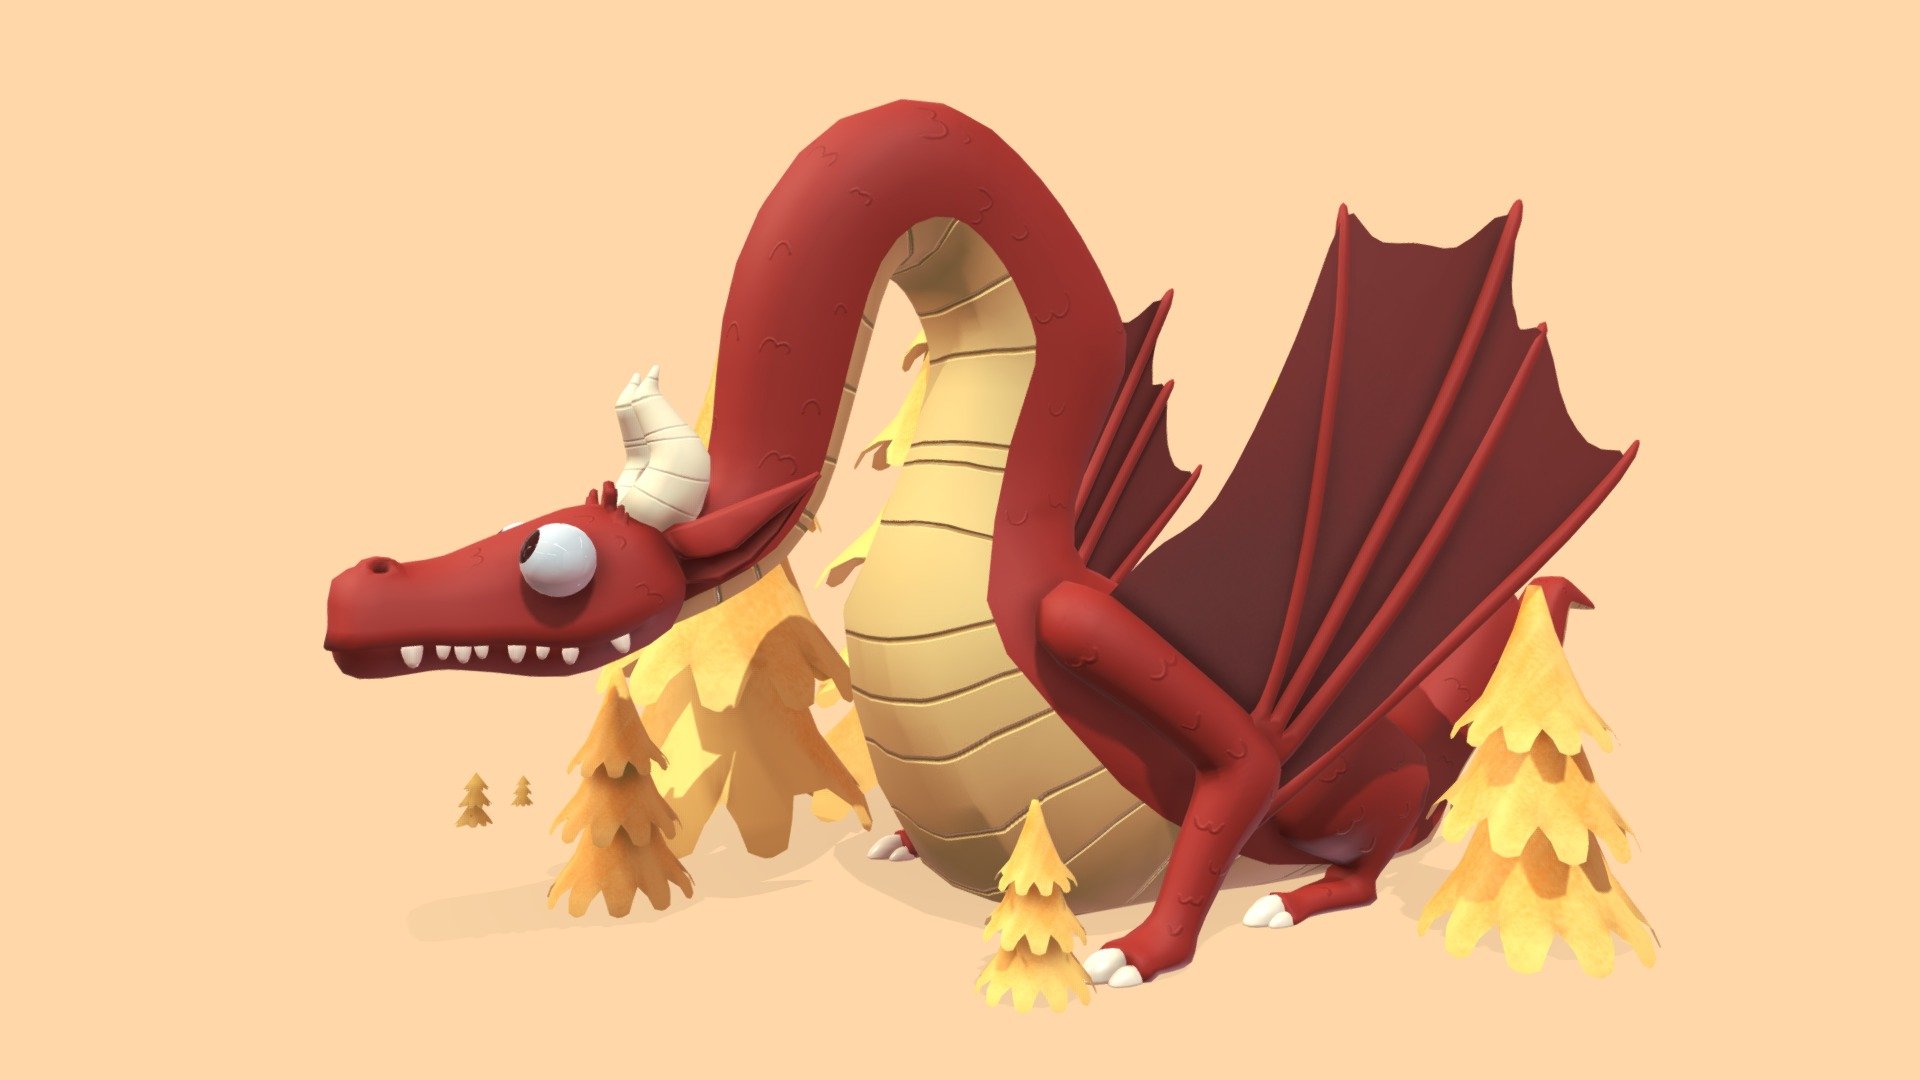 What would you do if you encountered this huge dragon hidden between the trees of a forest? 🌲🐉

This 3D scene was based on Forest dragon by Hiver 3d model